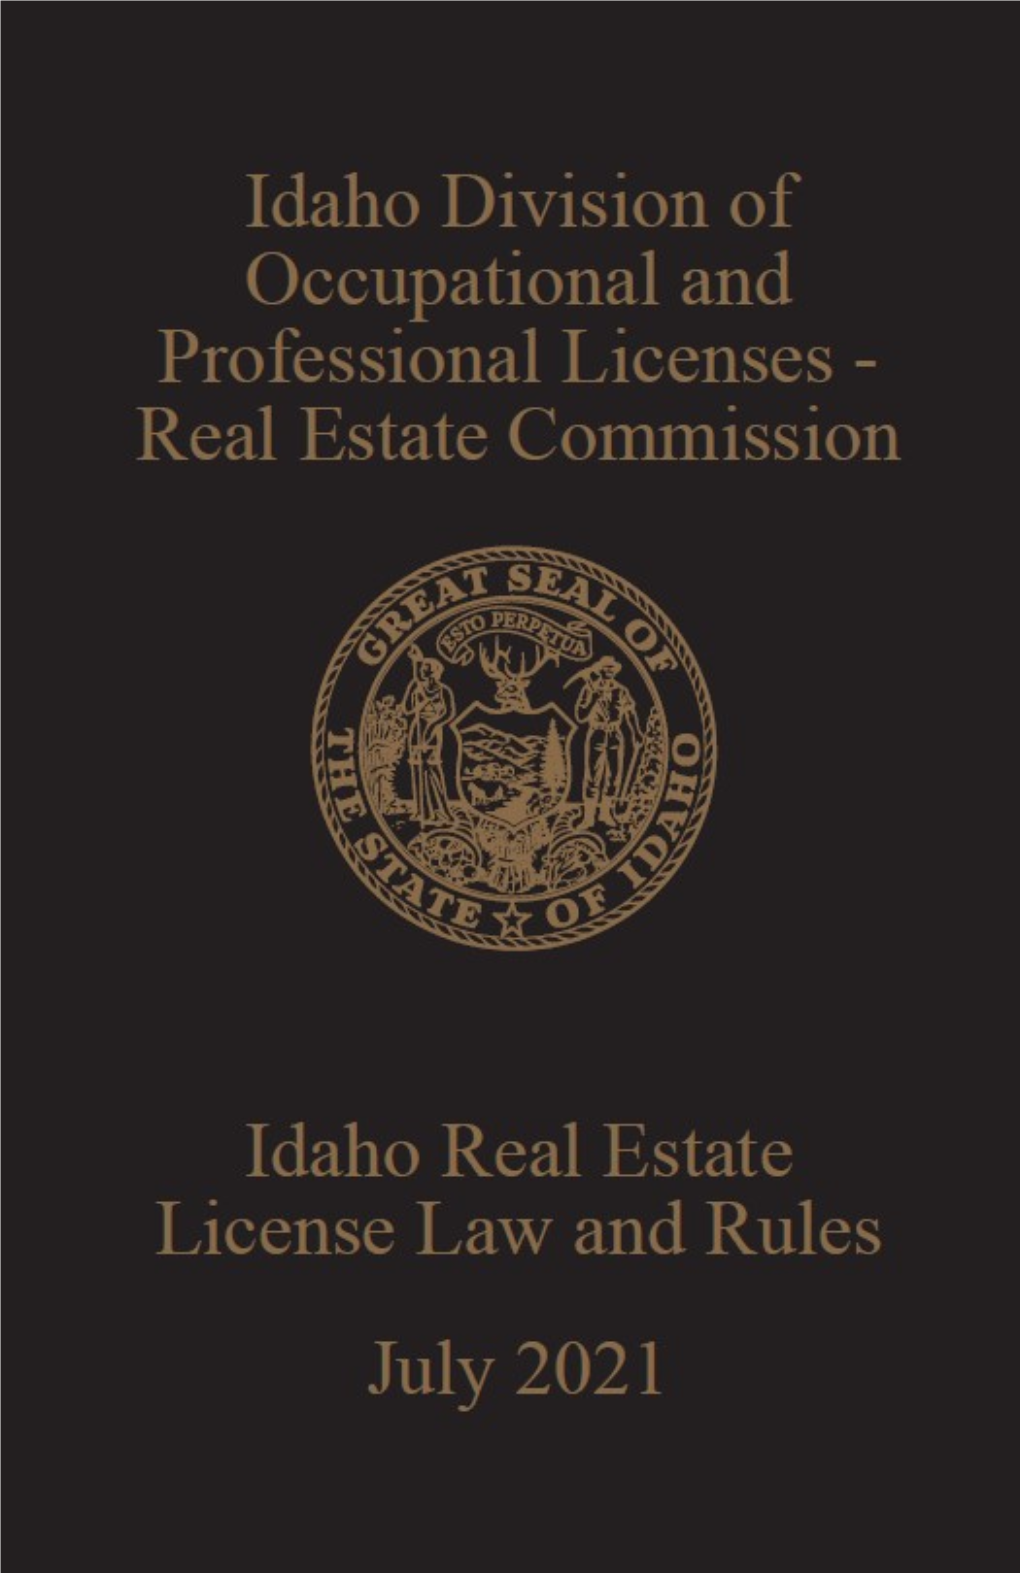 IREC Idaho Real Estate License Laws and Rules